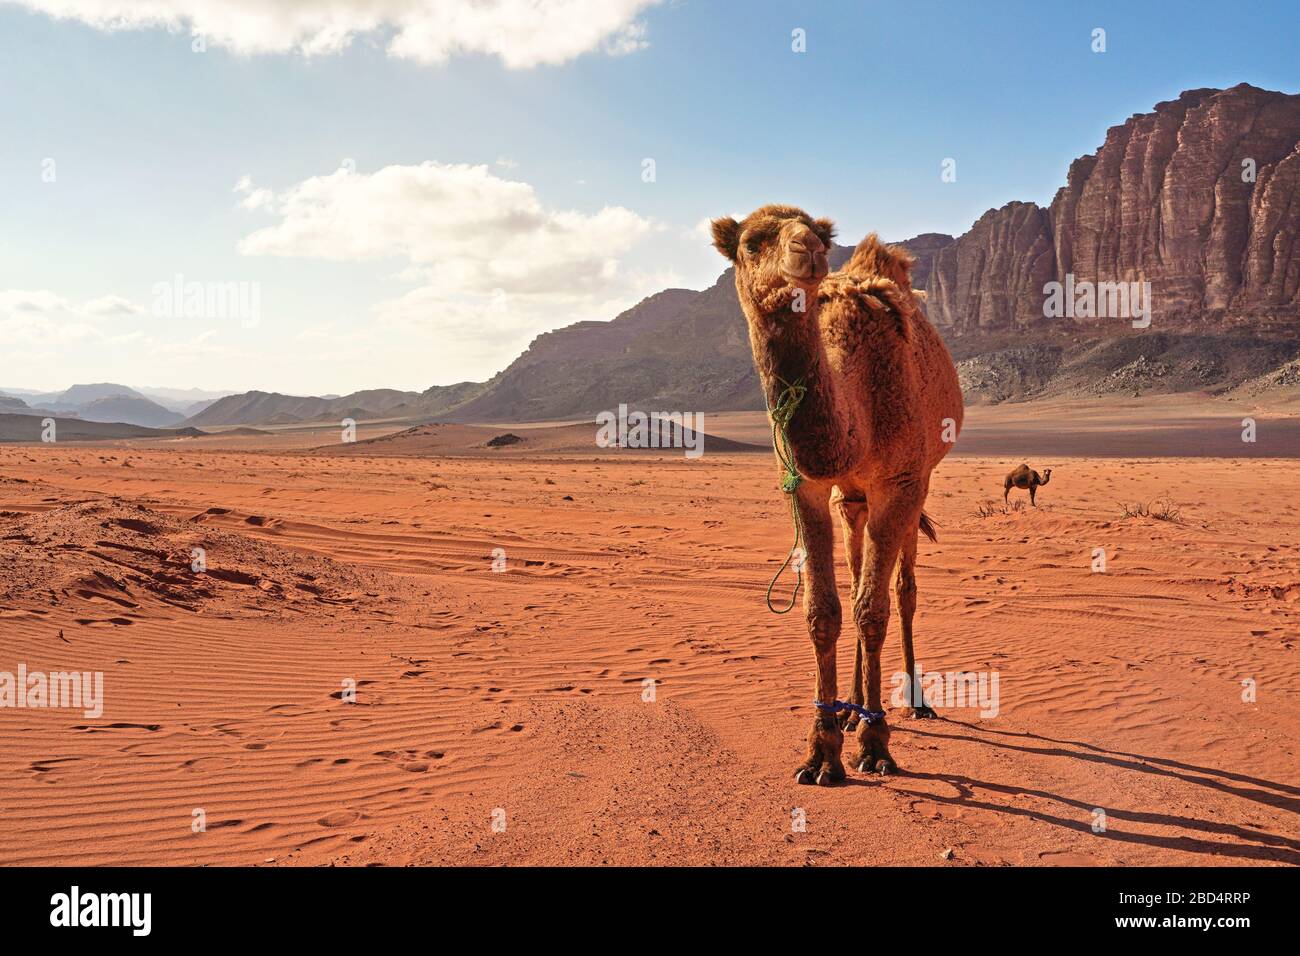 Two camels, one large animal in foreground, walking on orange red sand of  Wadi Rum desert, mountains background Stock Photo - Alamy